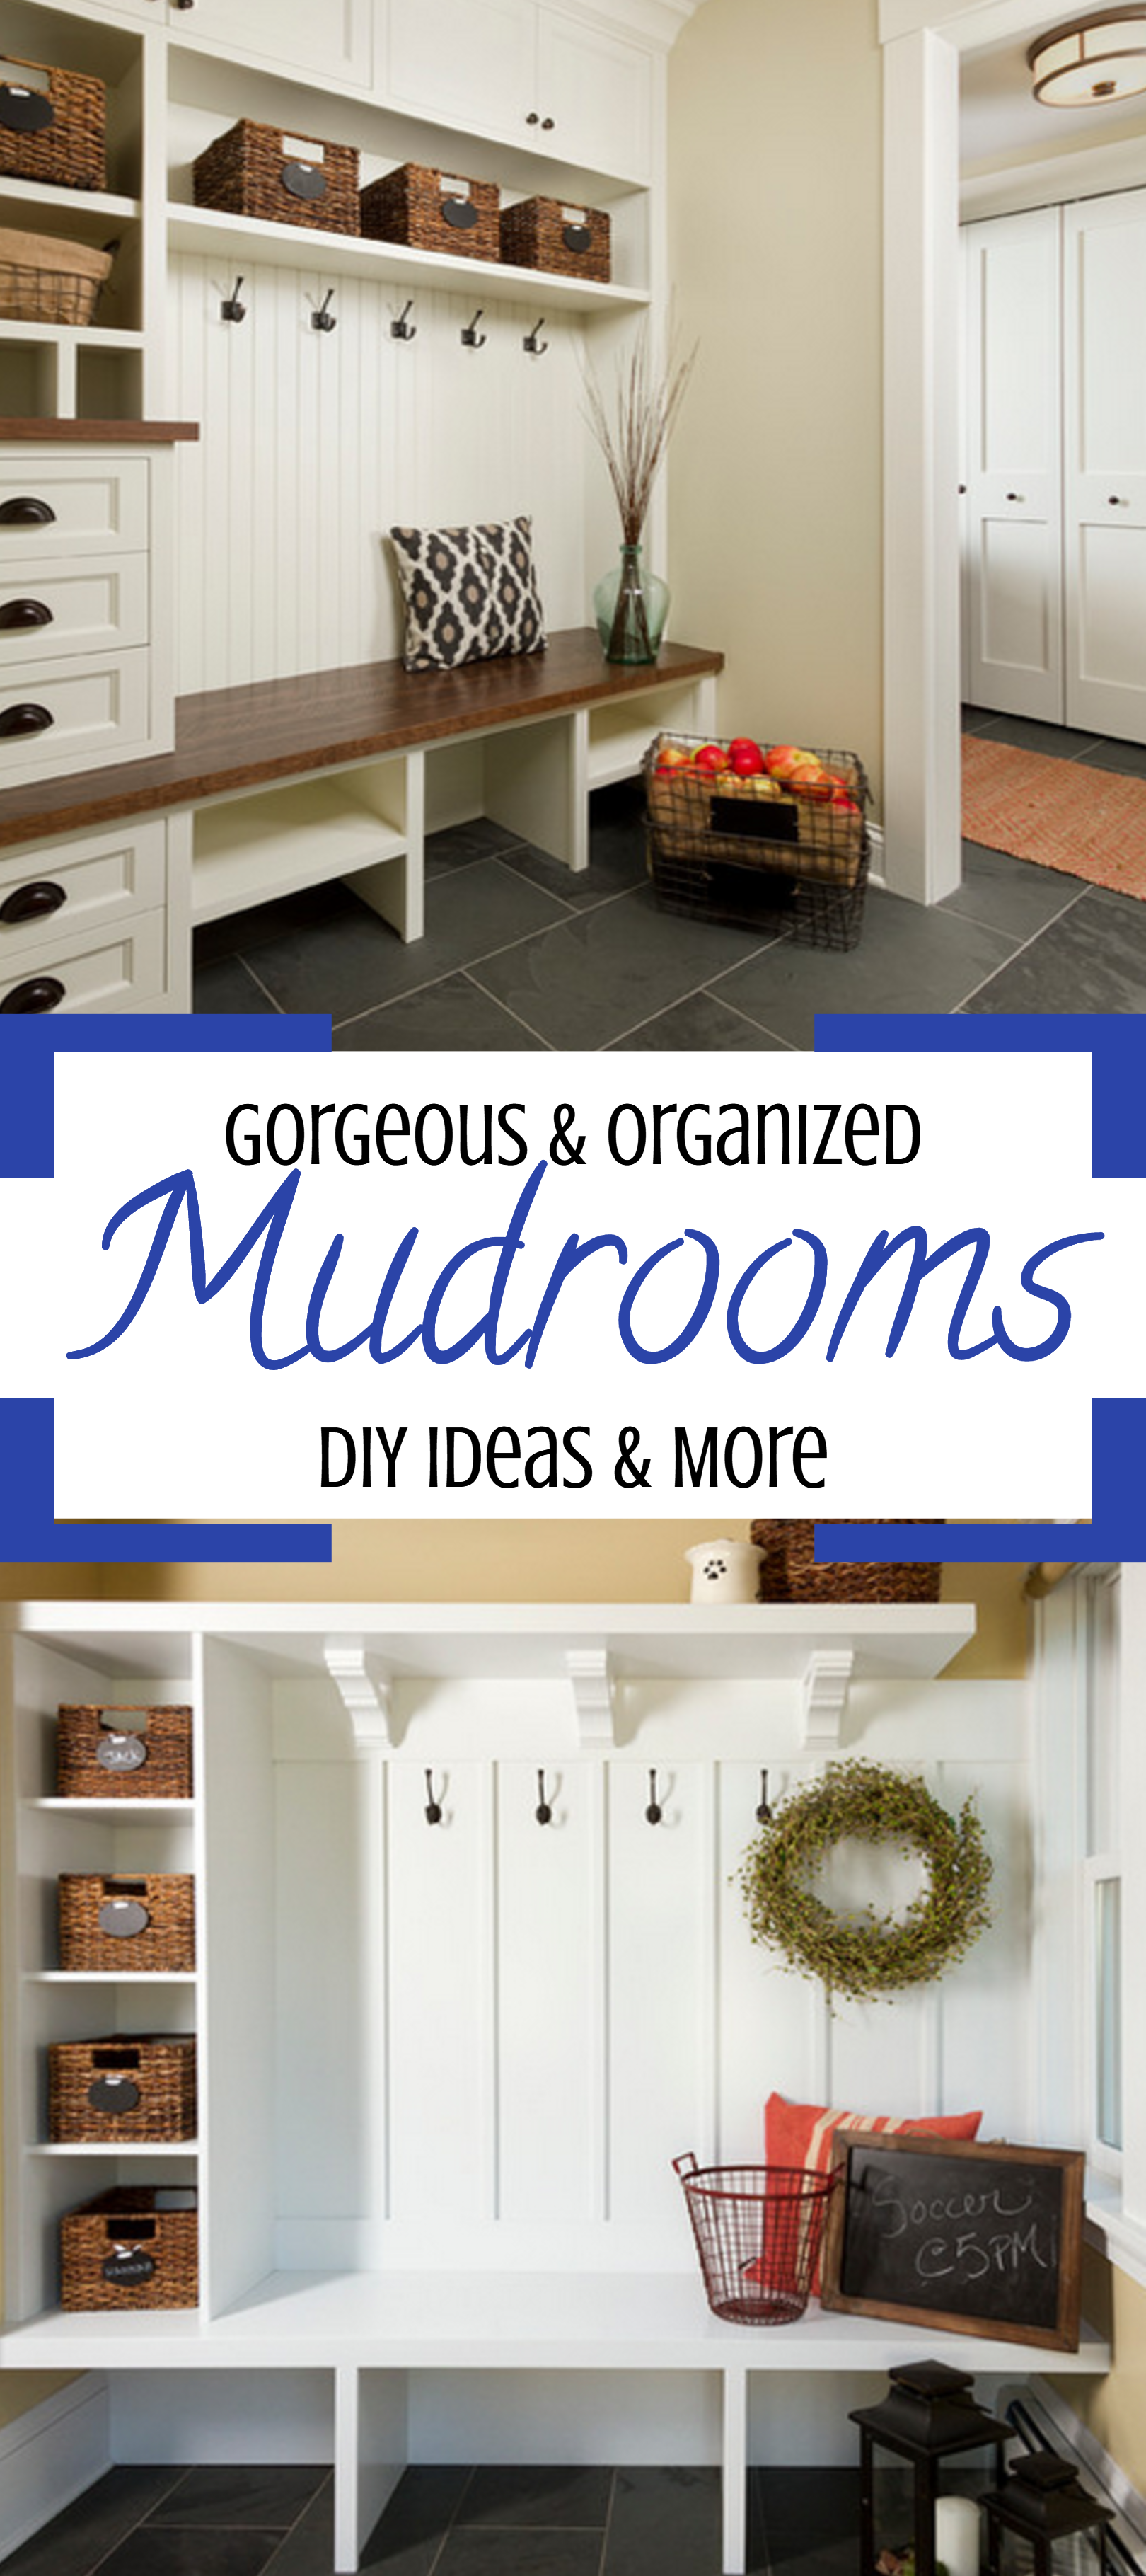 Rustic farmhouse DIY mudroom designs and mud rooms ideas we love… mudroom cubbies, cabinets, baskets, mudroom organization ideas and of course, mudroom benches, too. What great ideas for a mud room in your home.